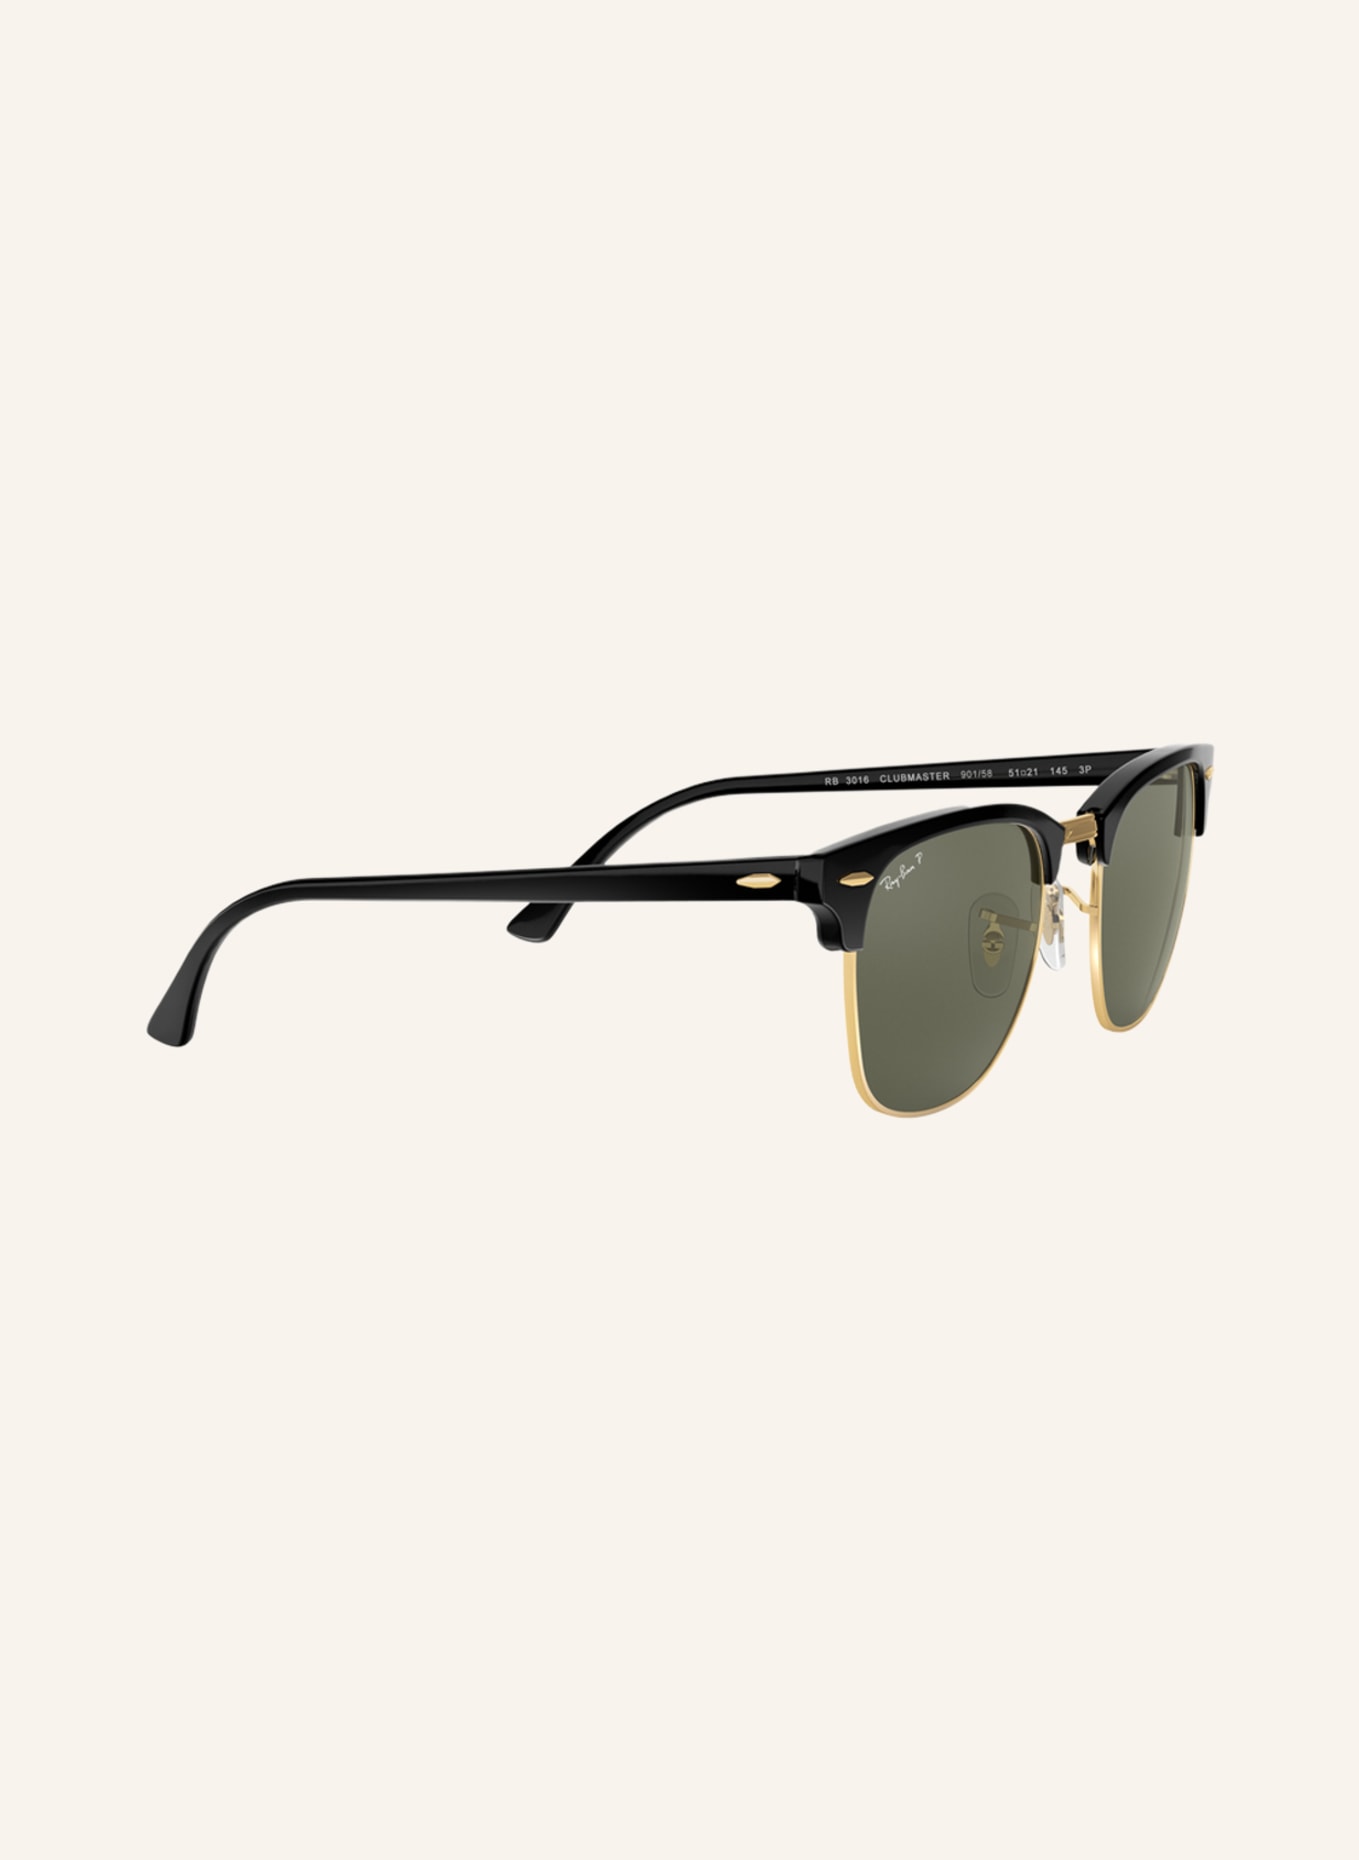 Amazon.com: Ray Ban RB3016 clubmaster sunglasses Tortoise frame Green  lenses : Clothing, Shoes & Jewelry